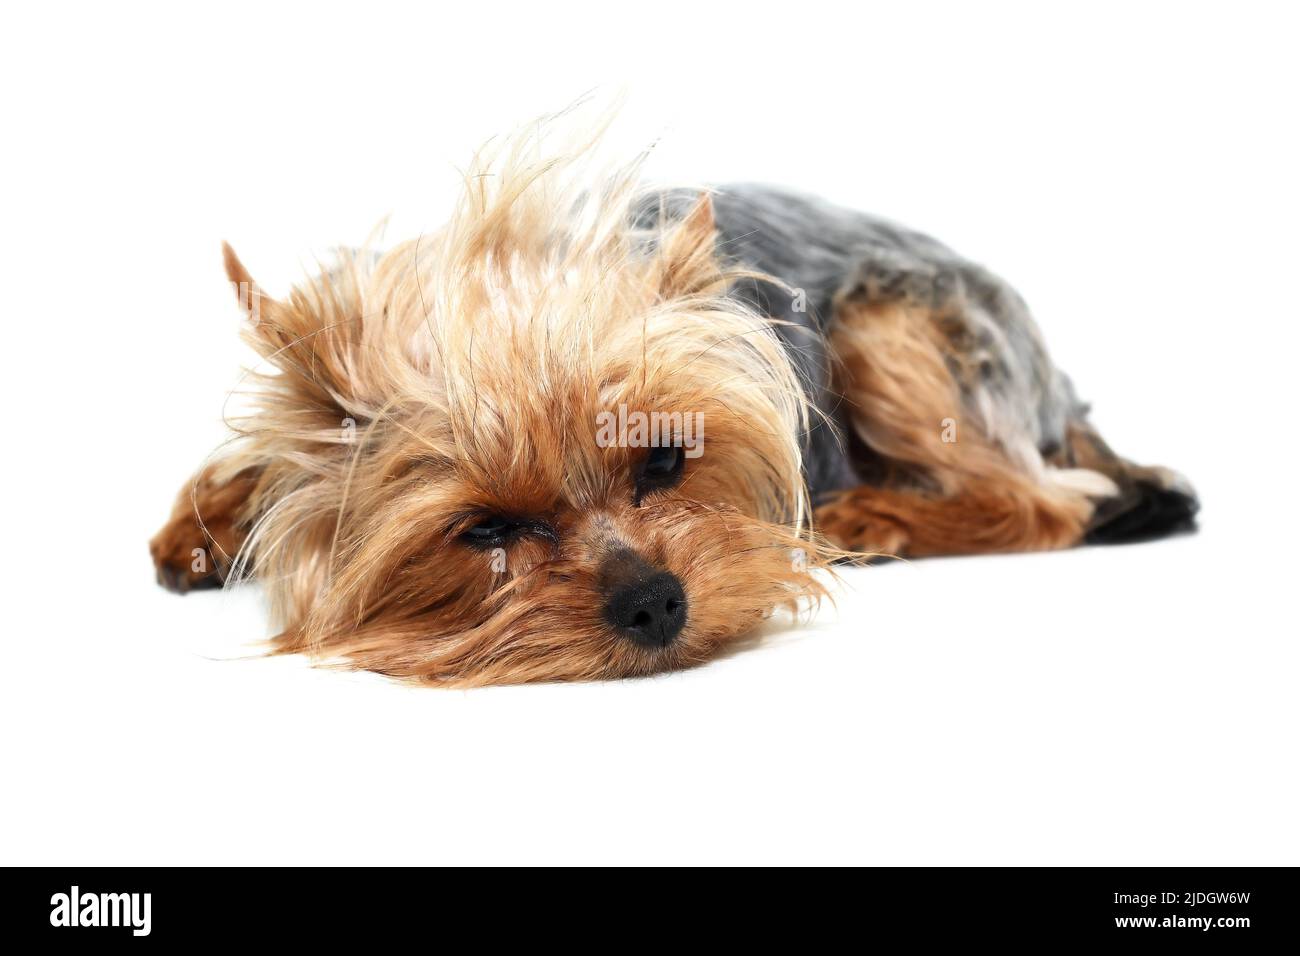 Alone funny puppy yorkshire terrier on white background Stock Photo